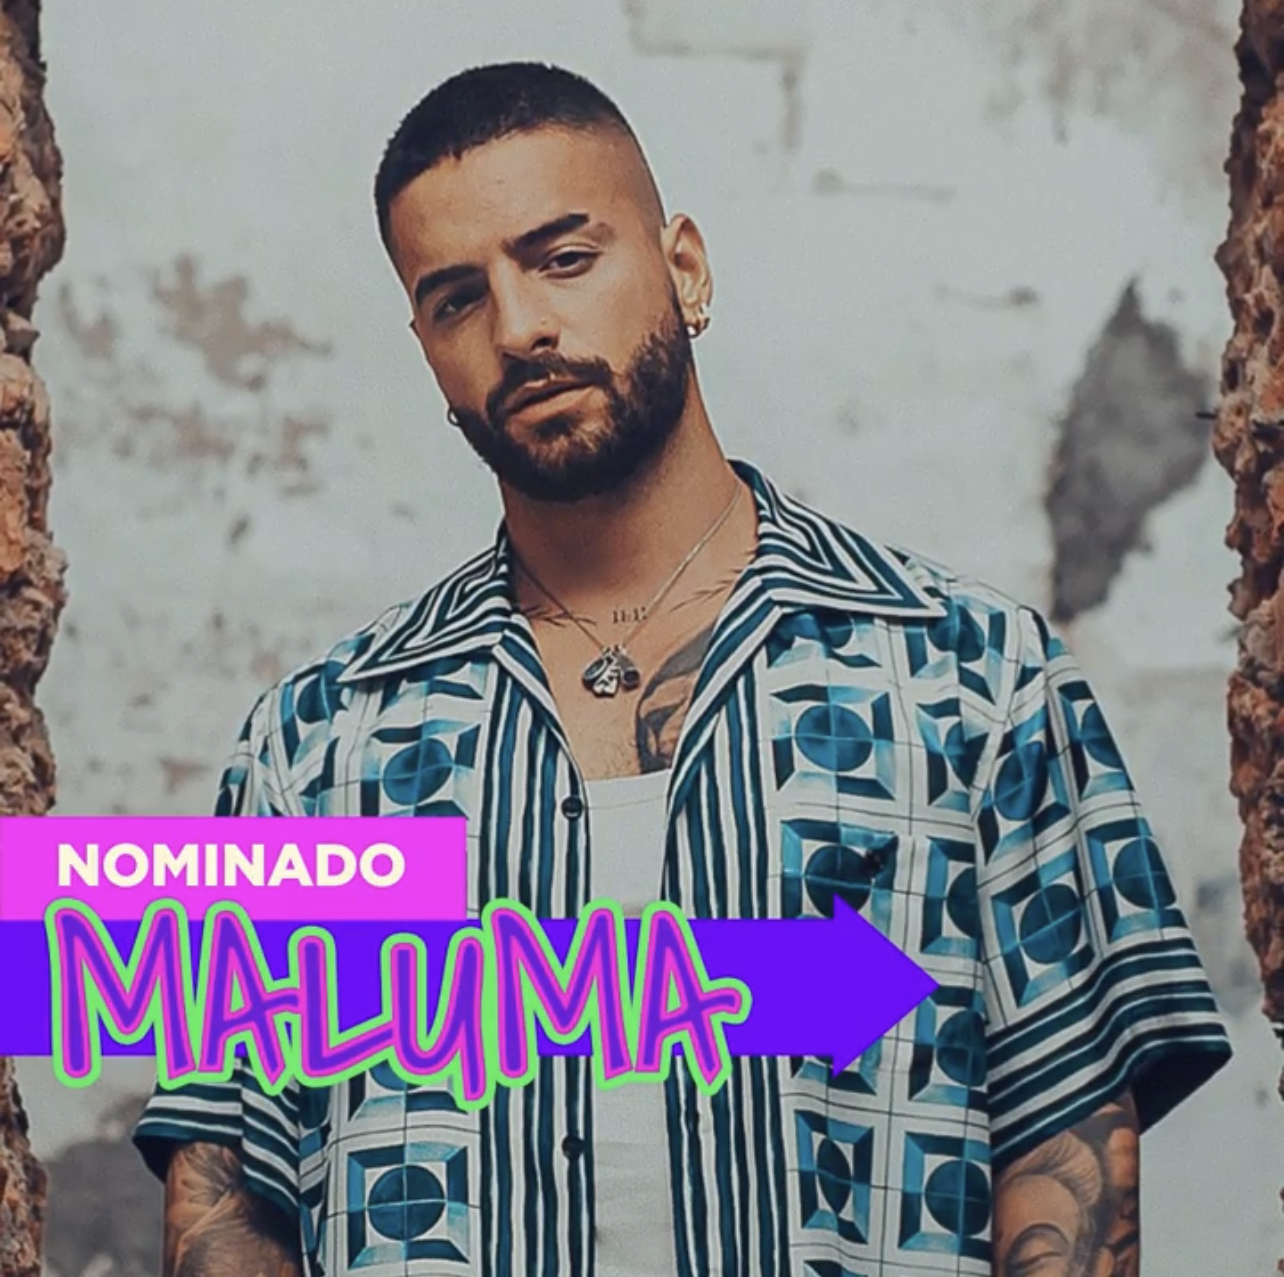 WITH 11 NOMINATIONS MALUMA AMONG THE MOST NOMINATED ARTISTS FOR THE 2021 PREMIOS JUVENTUD